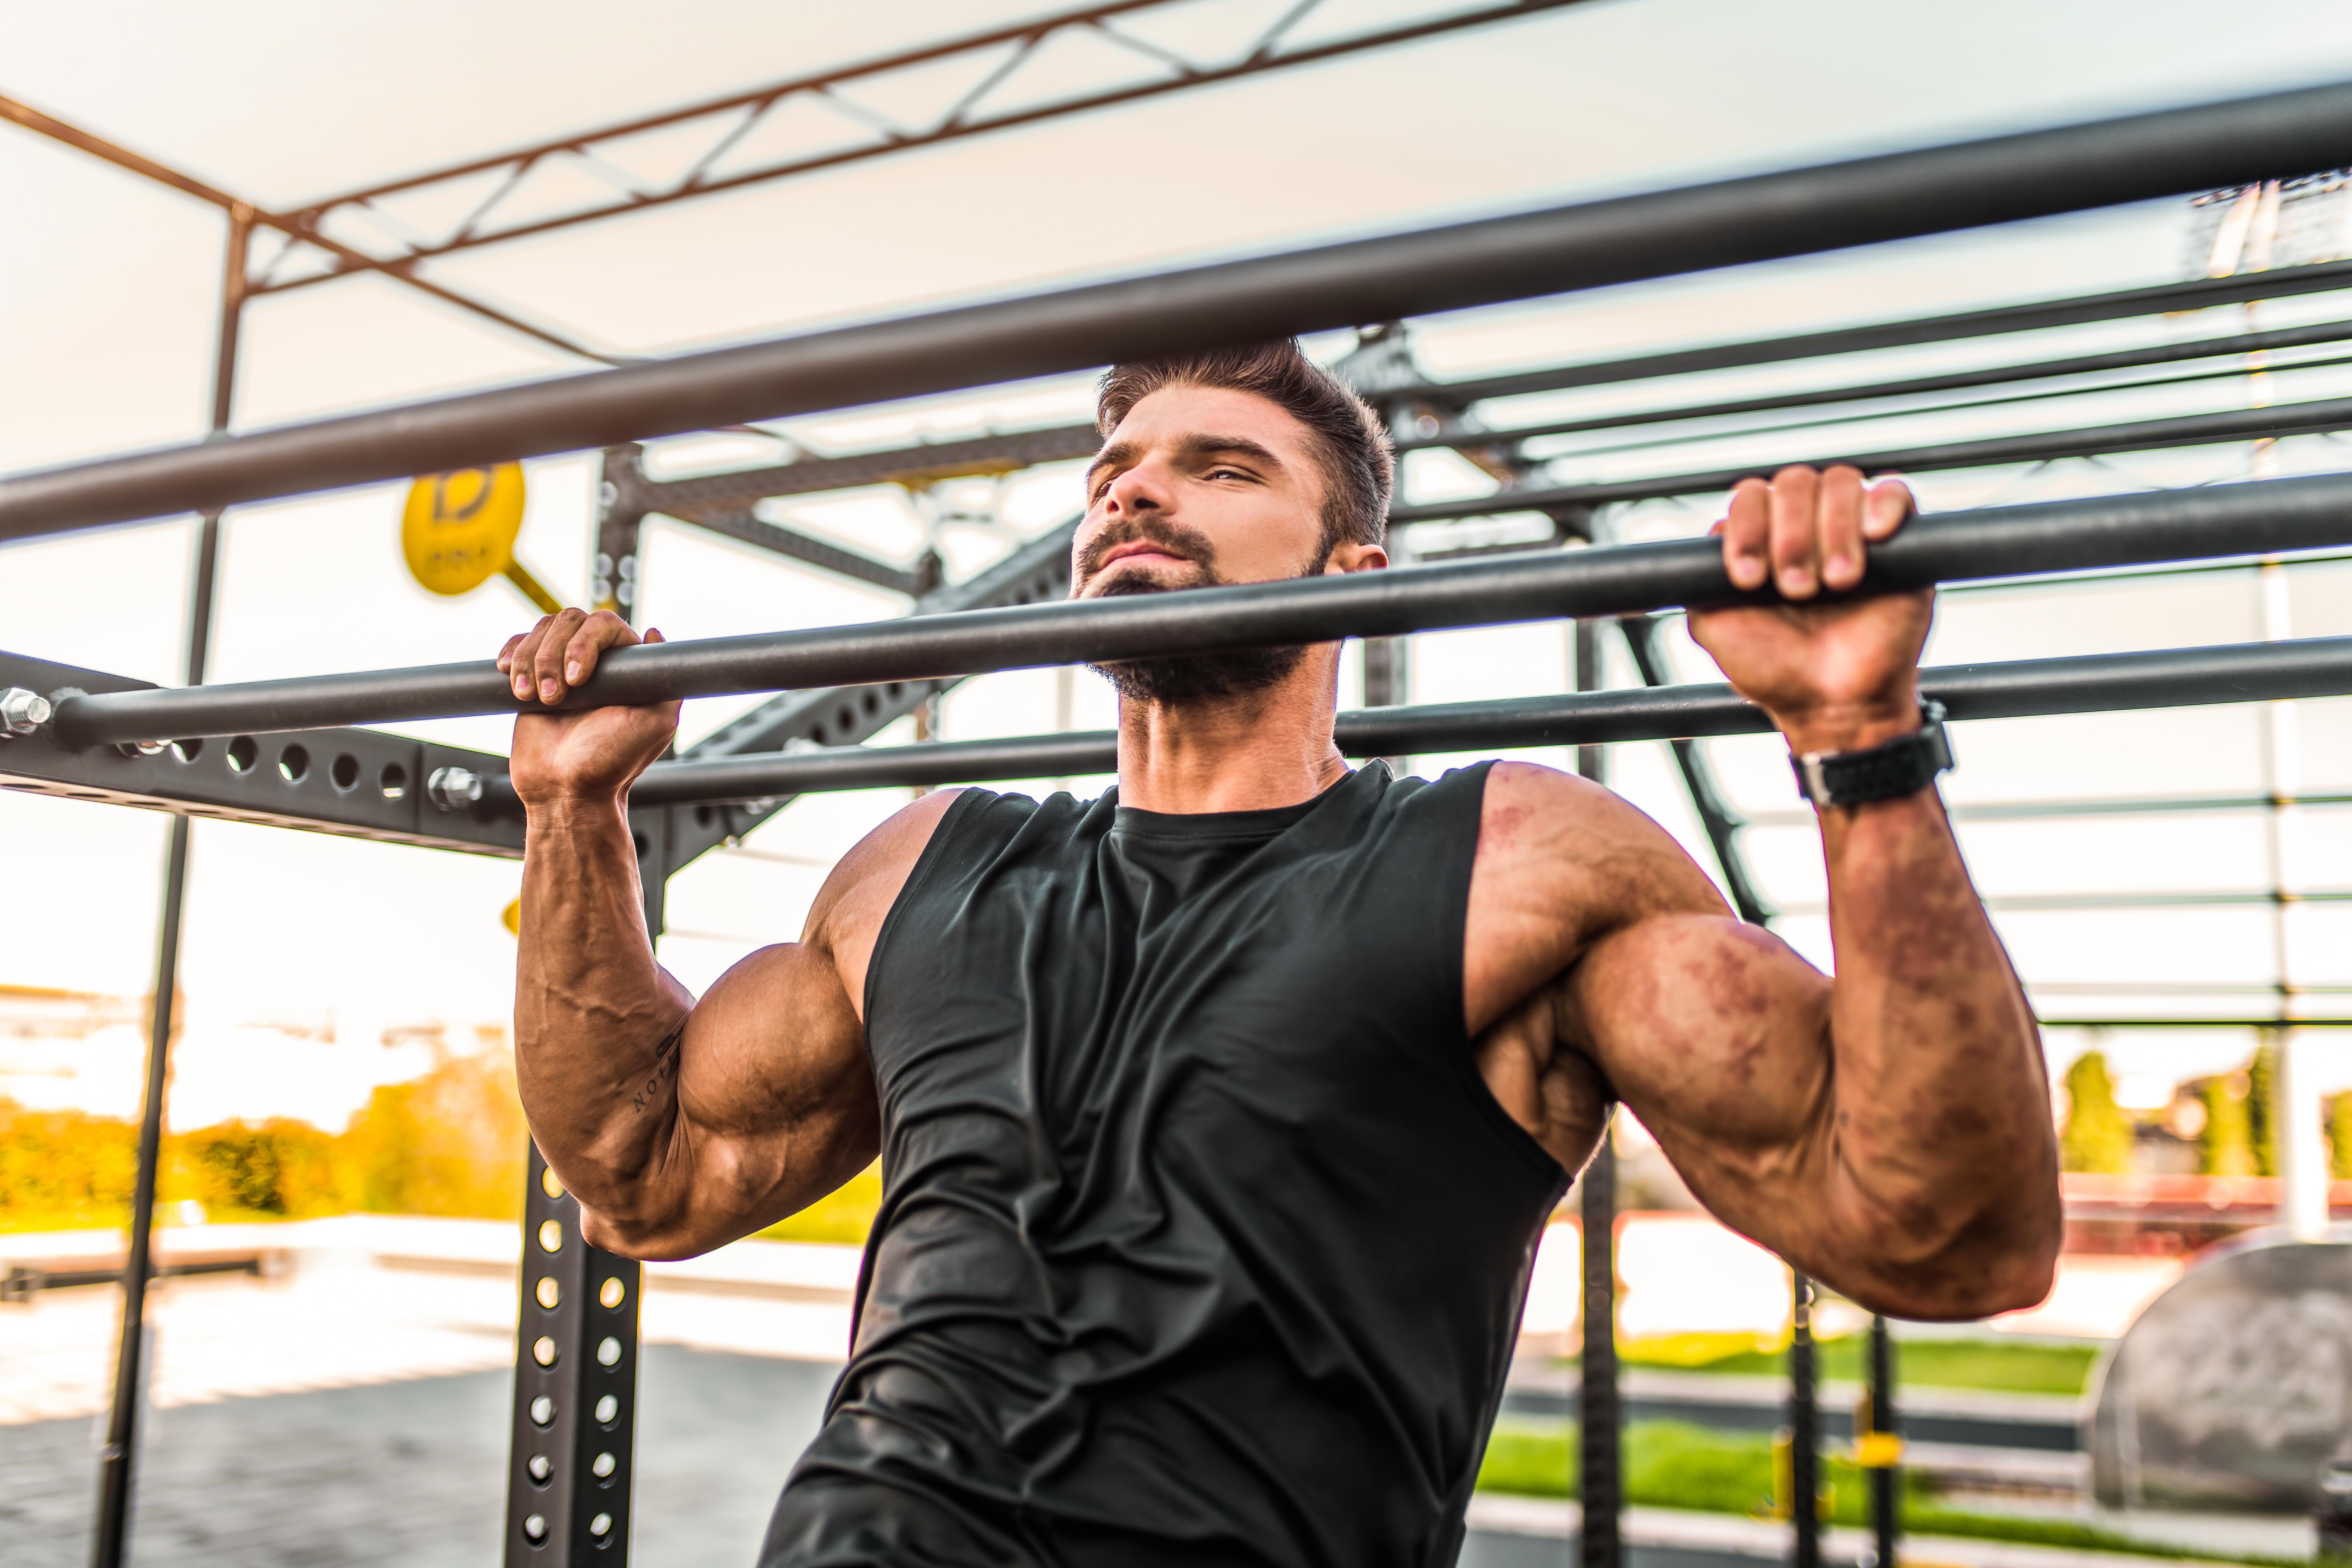 Learn How to Do Strict Pull-Ups with Progressions